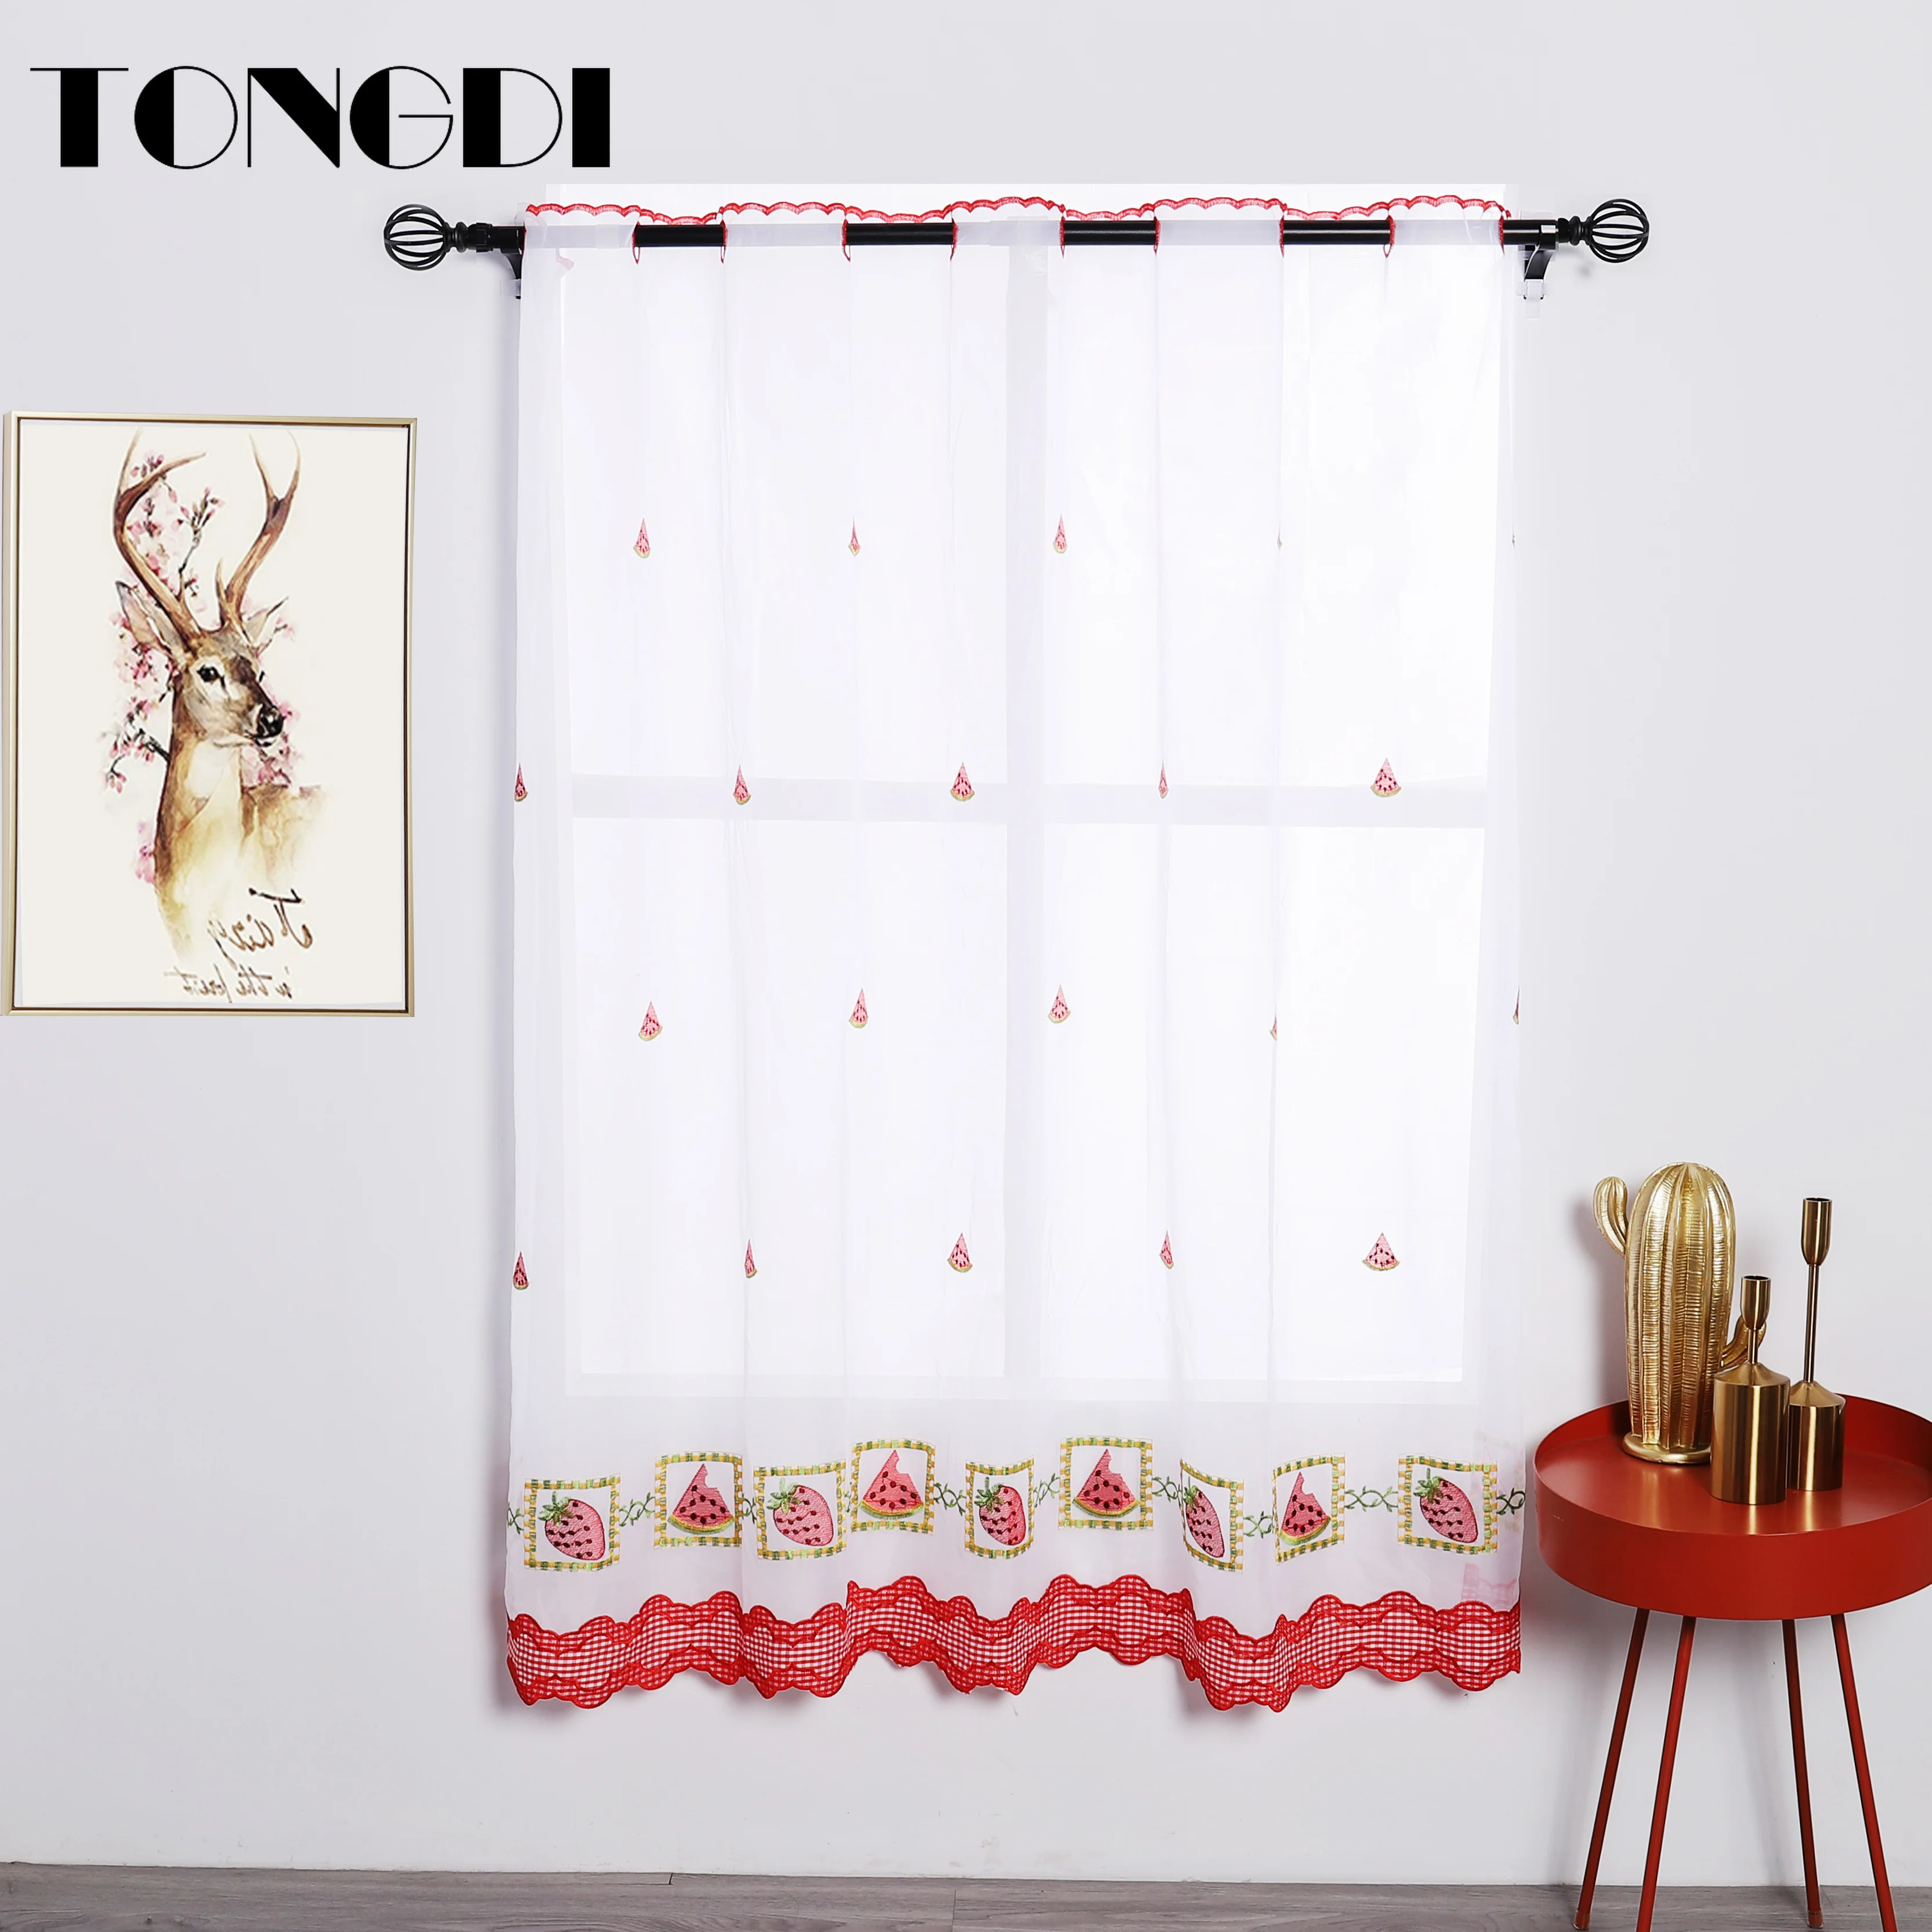 

TONGDI Kitchen Curtain Valance Sheer Tiers Pastoral Fruit Cafe Embroidery Tulle Decoration For Home Window Kitchen Dining Room